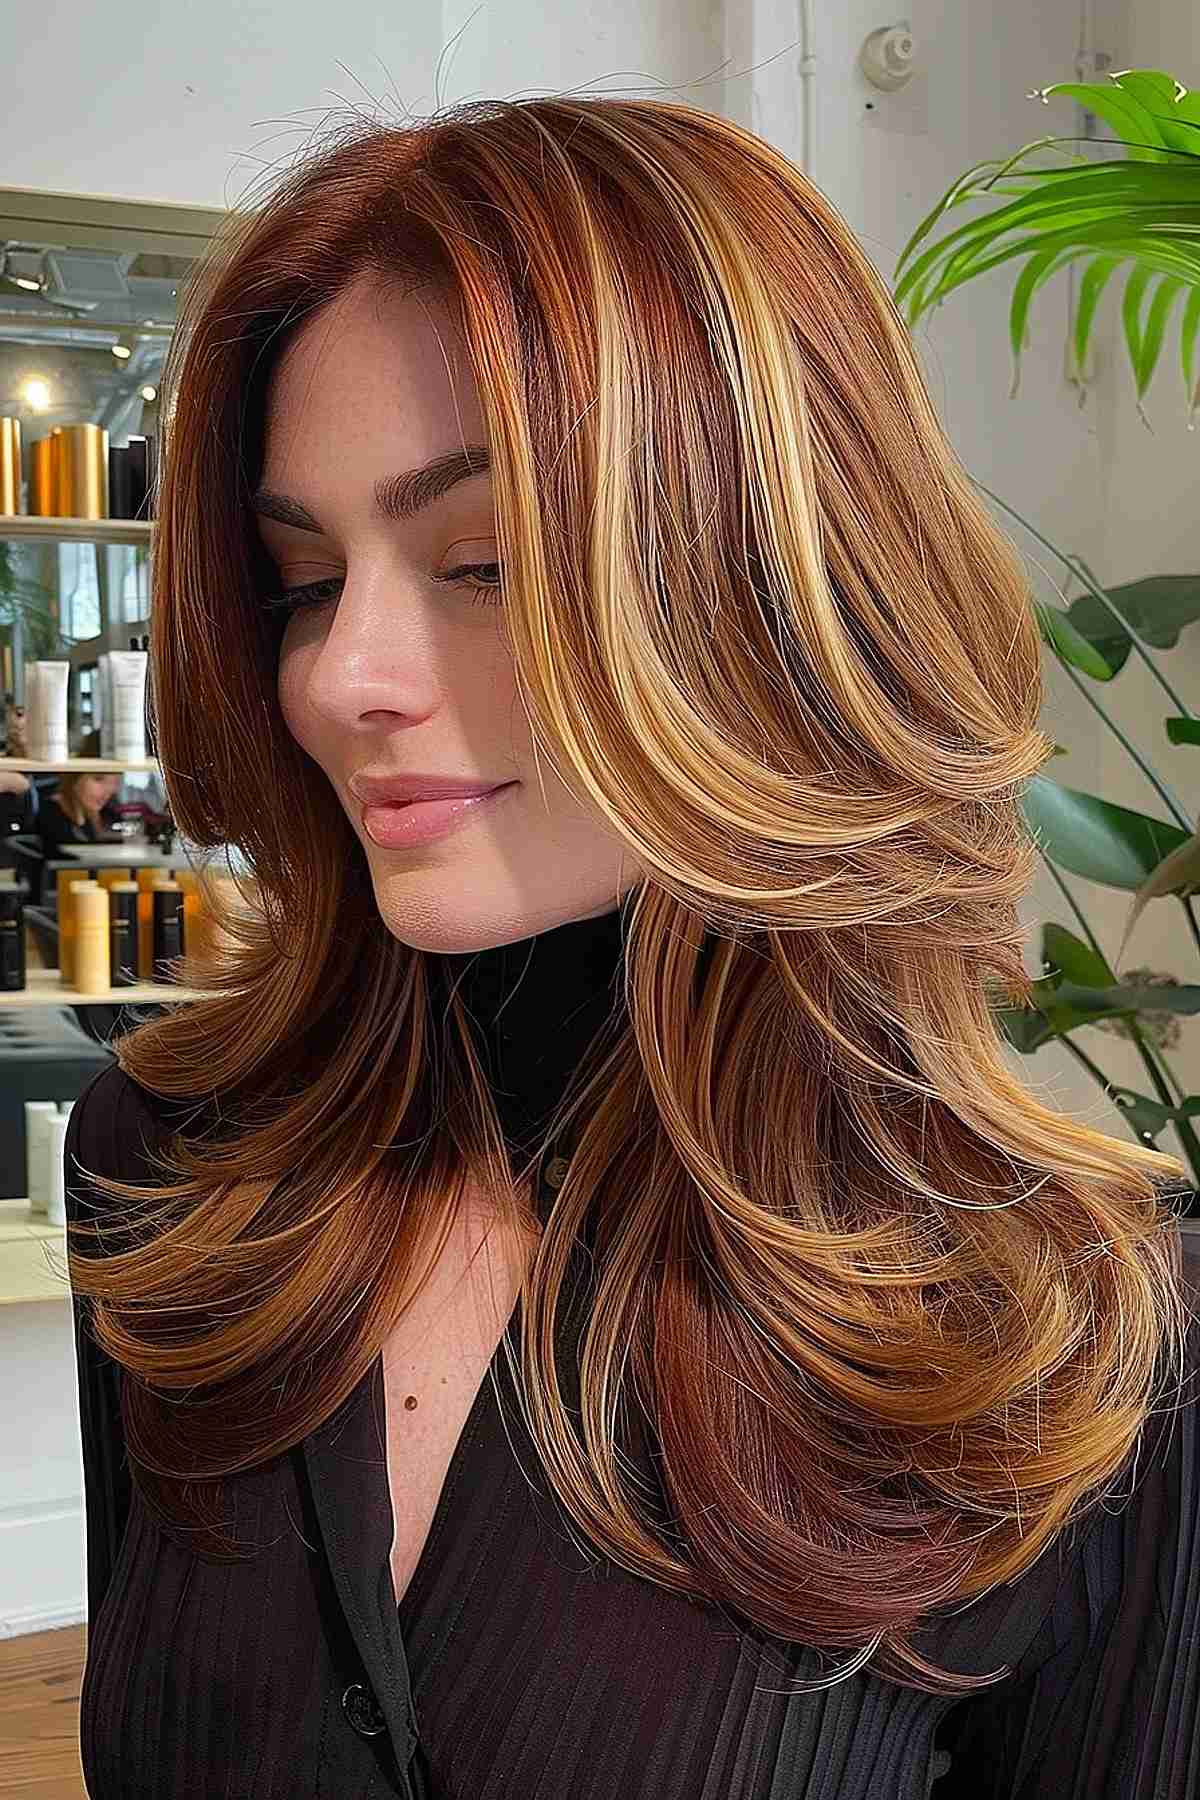 Medium-length ginger hair with chunky blonde stripes and soft layers